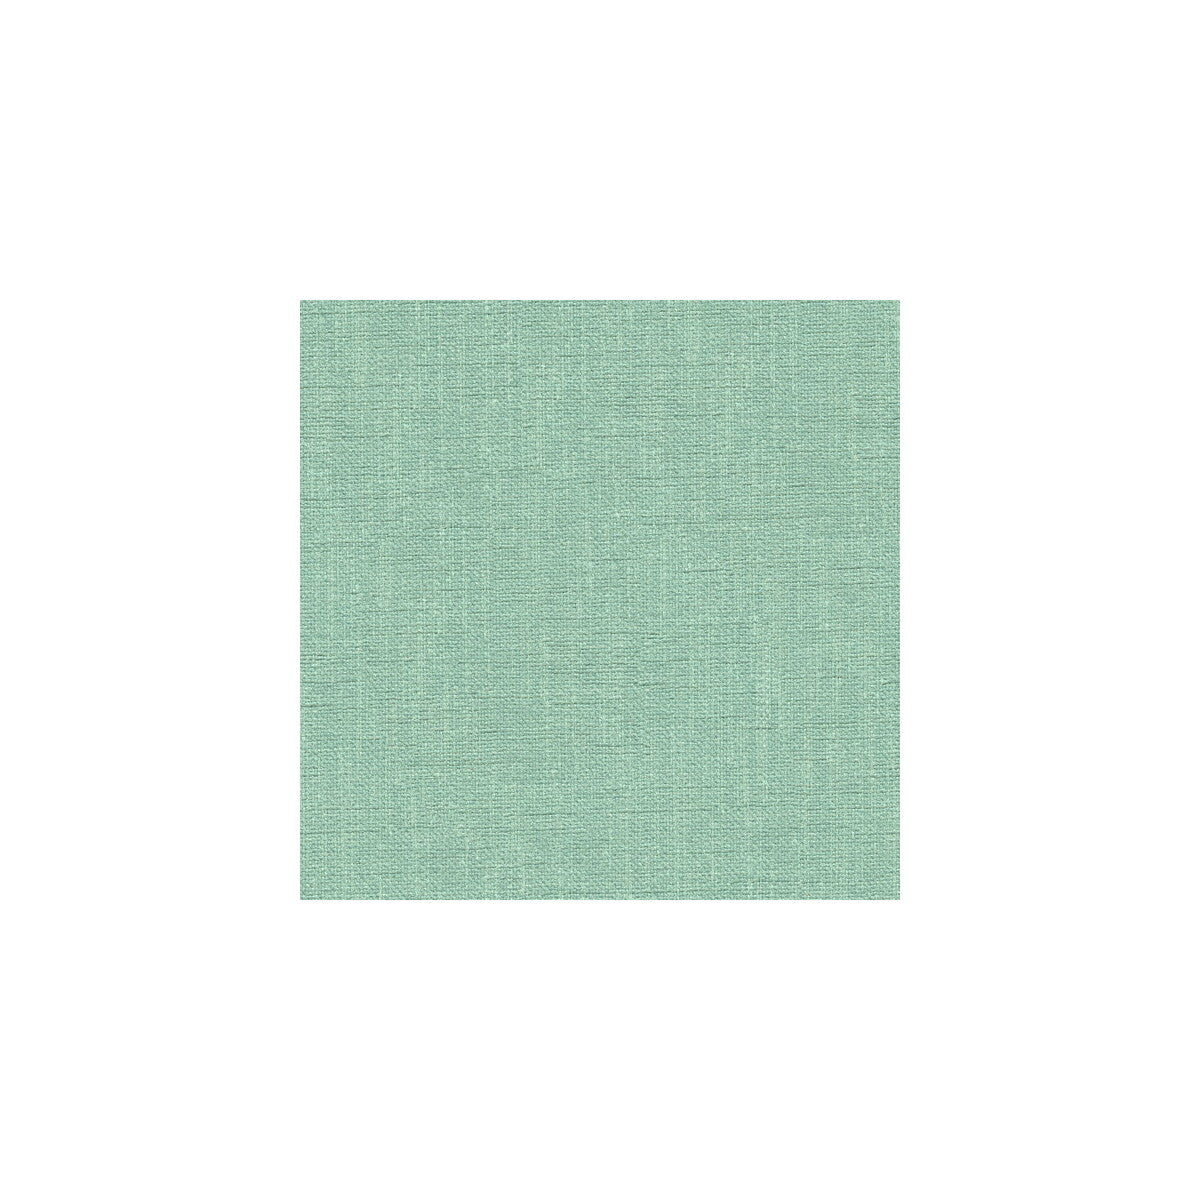 Kravet Basics fabric in 33120-13 color - pattern 33120.13.0 - by Kravet Basics in the Perfect Plains collection